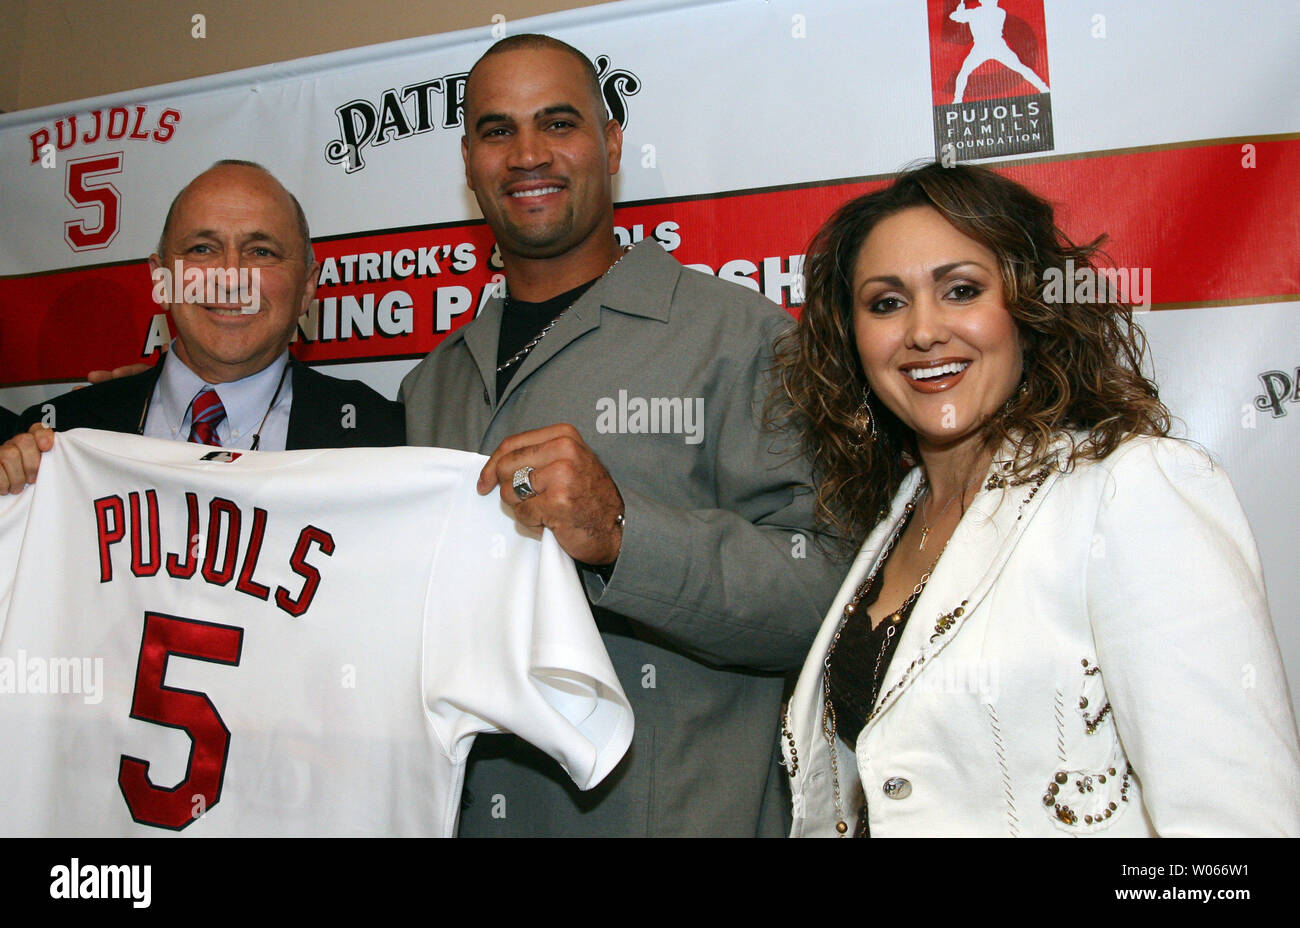 St. Louis Cardinals Albert Pujols (C) along with wife Deidre and Hanon Management Group's Patrick Hanon, pose for a photograph after announcing the partnership of a group that will open a resturant in the fall called PUJOLS FIVE, in the Westport area of St. Louis on June 1, 2006. The Pujols' hope that the resturant will help fund the Pujols Family Foundation, the couples 501C3 organization. (UPI Photo/Bill Greenblatt) Stock Photo